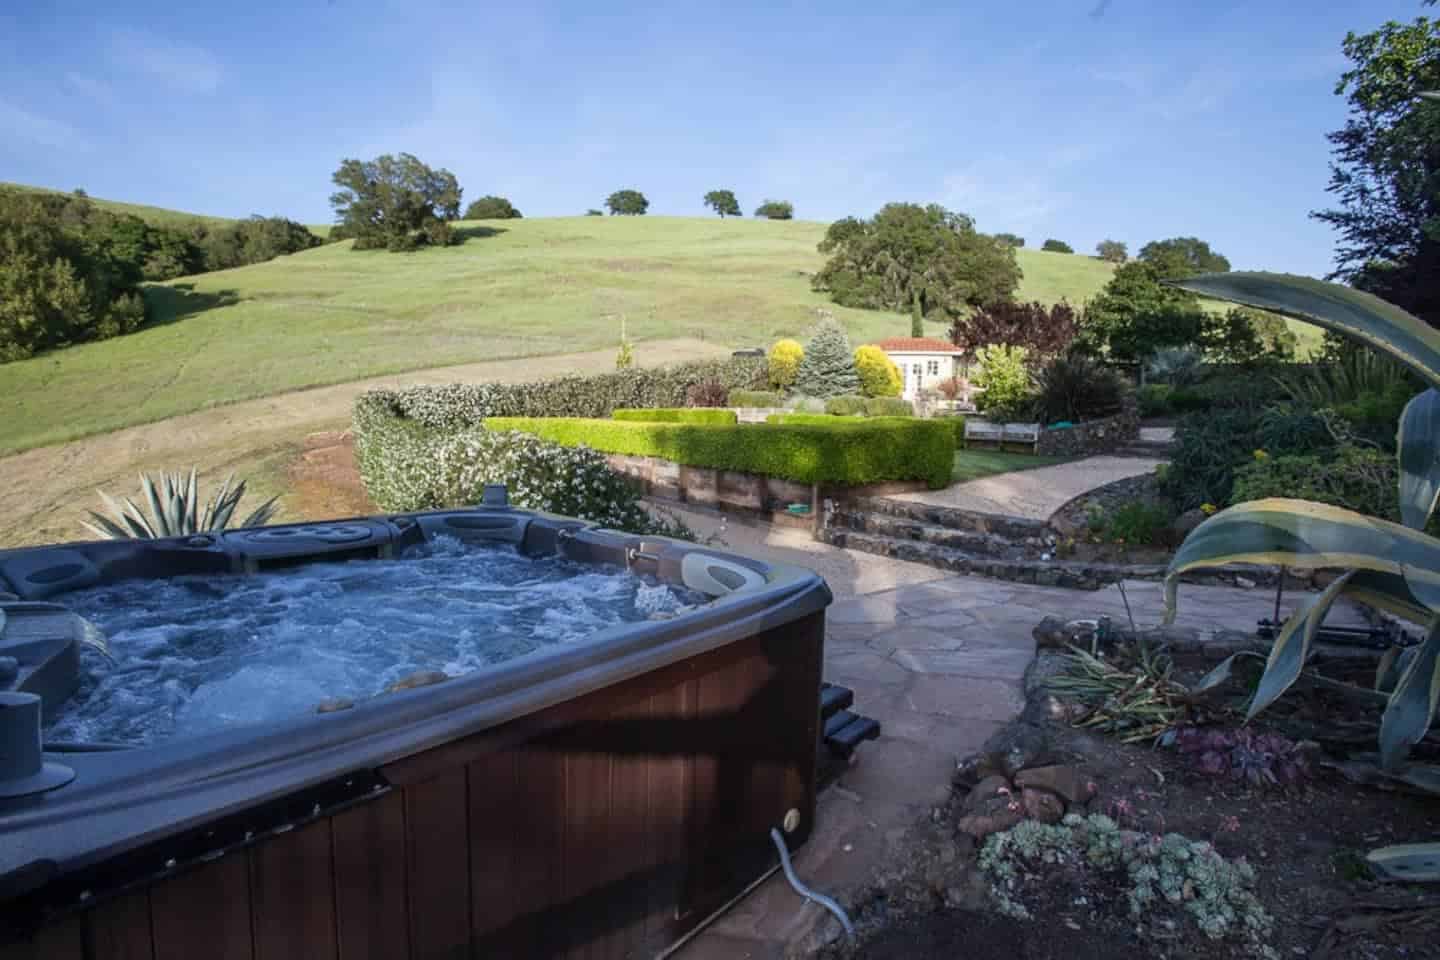 Image of Airbnb rental in Sonoma, California